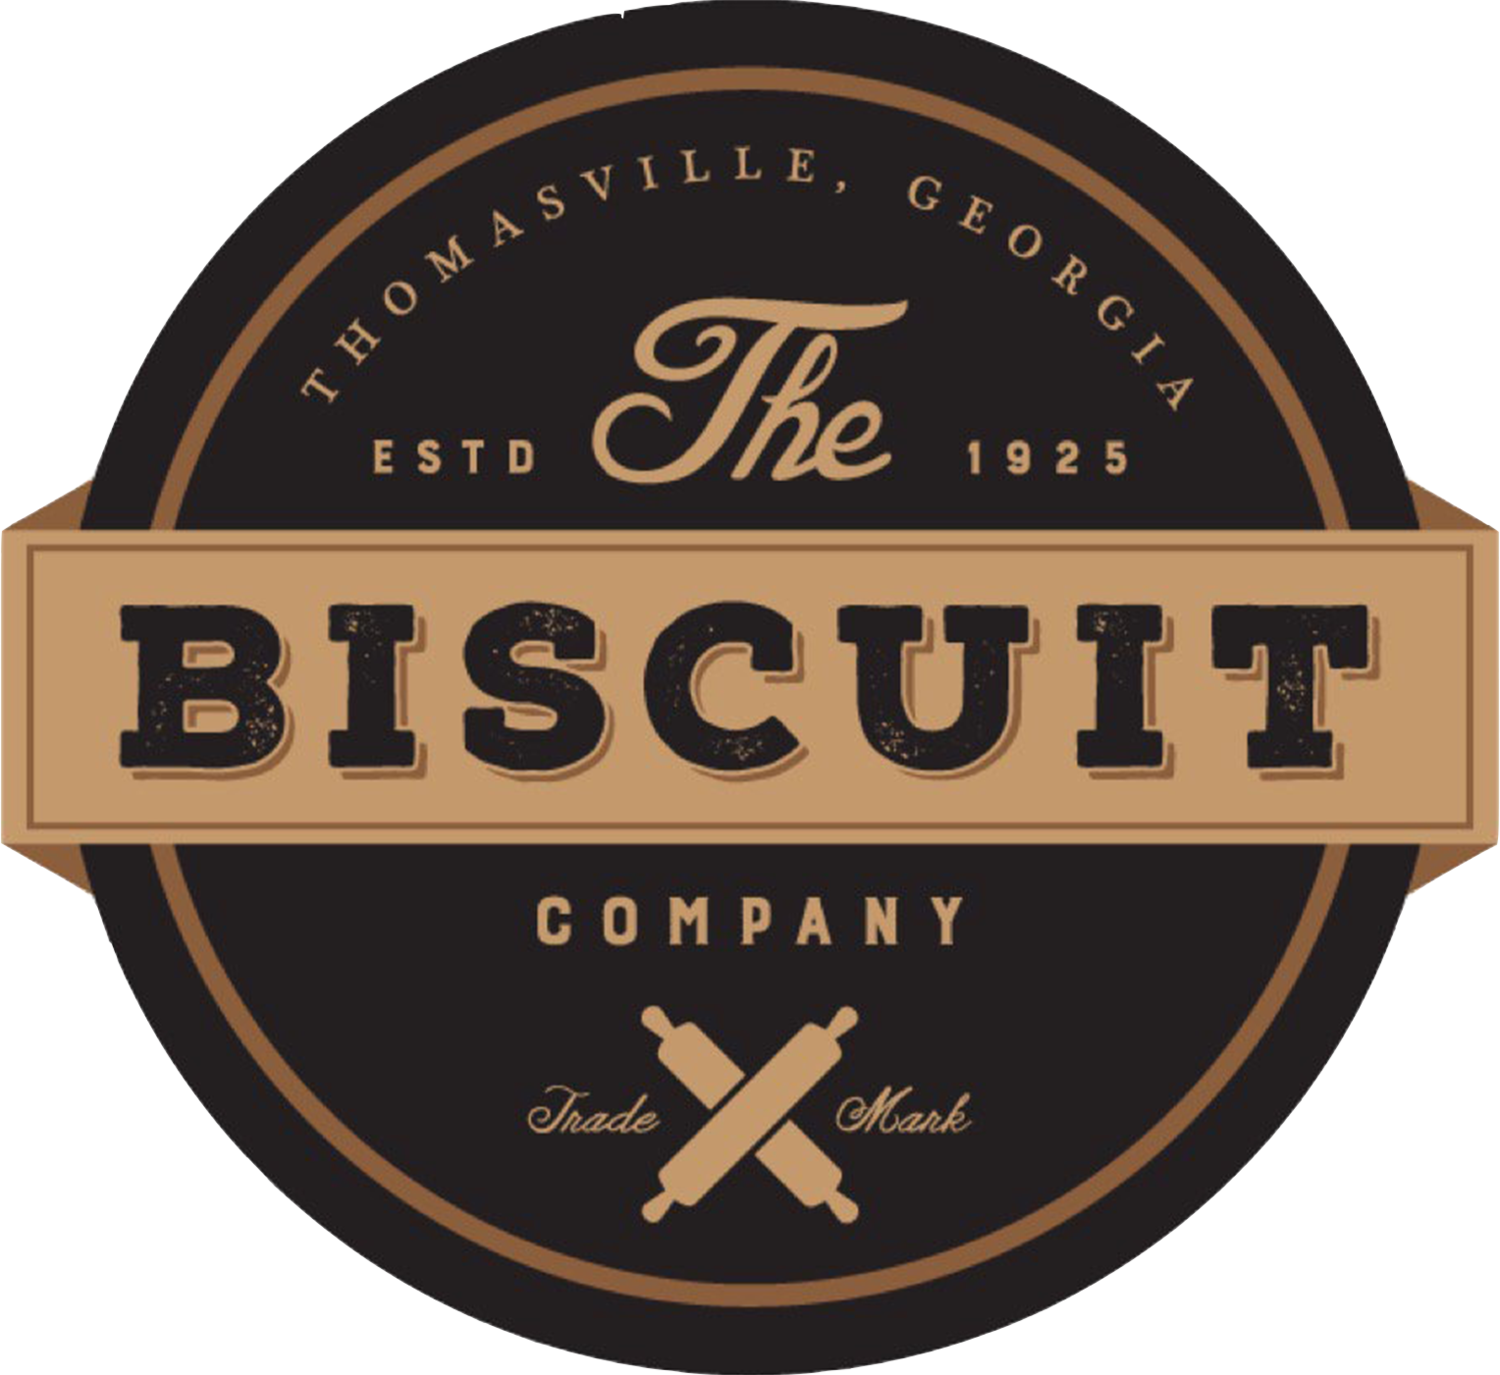 The Biscuit Company